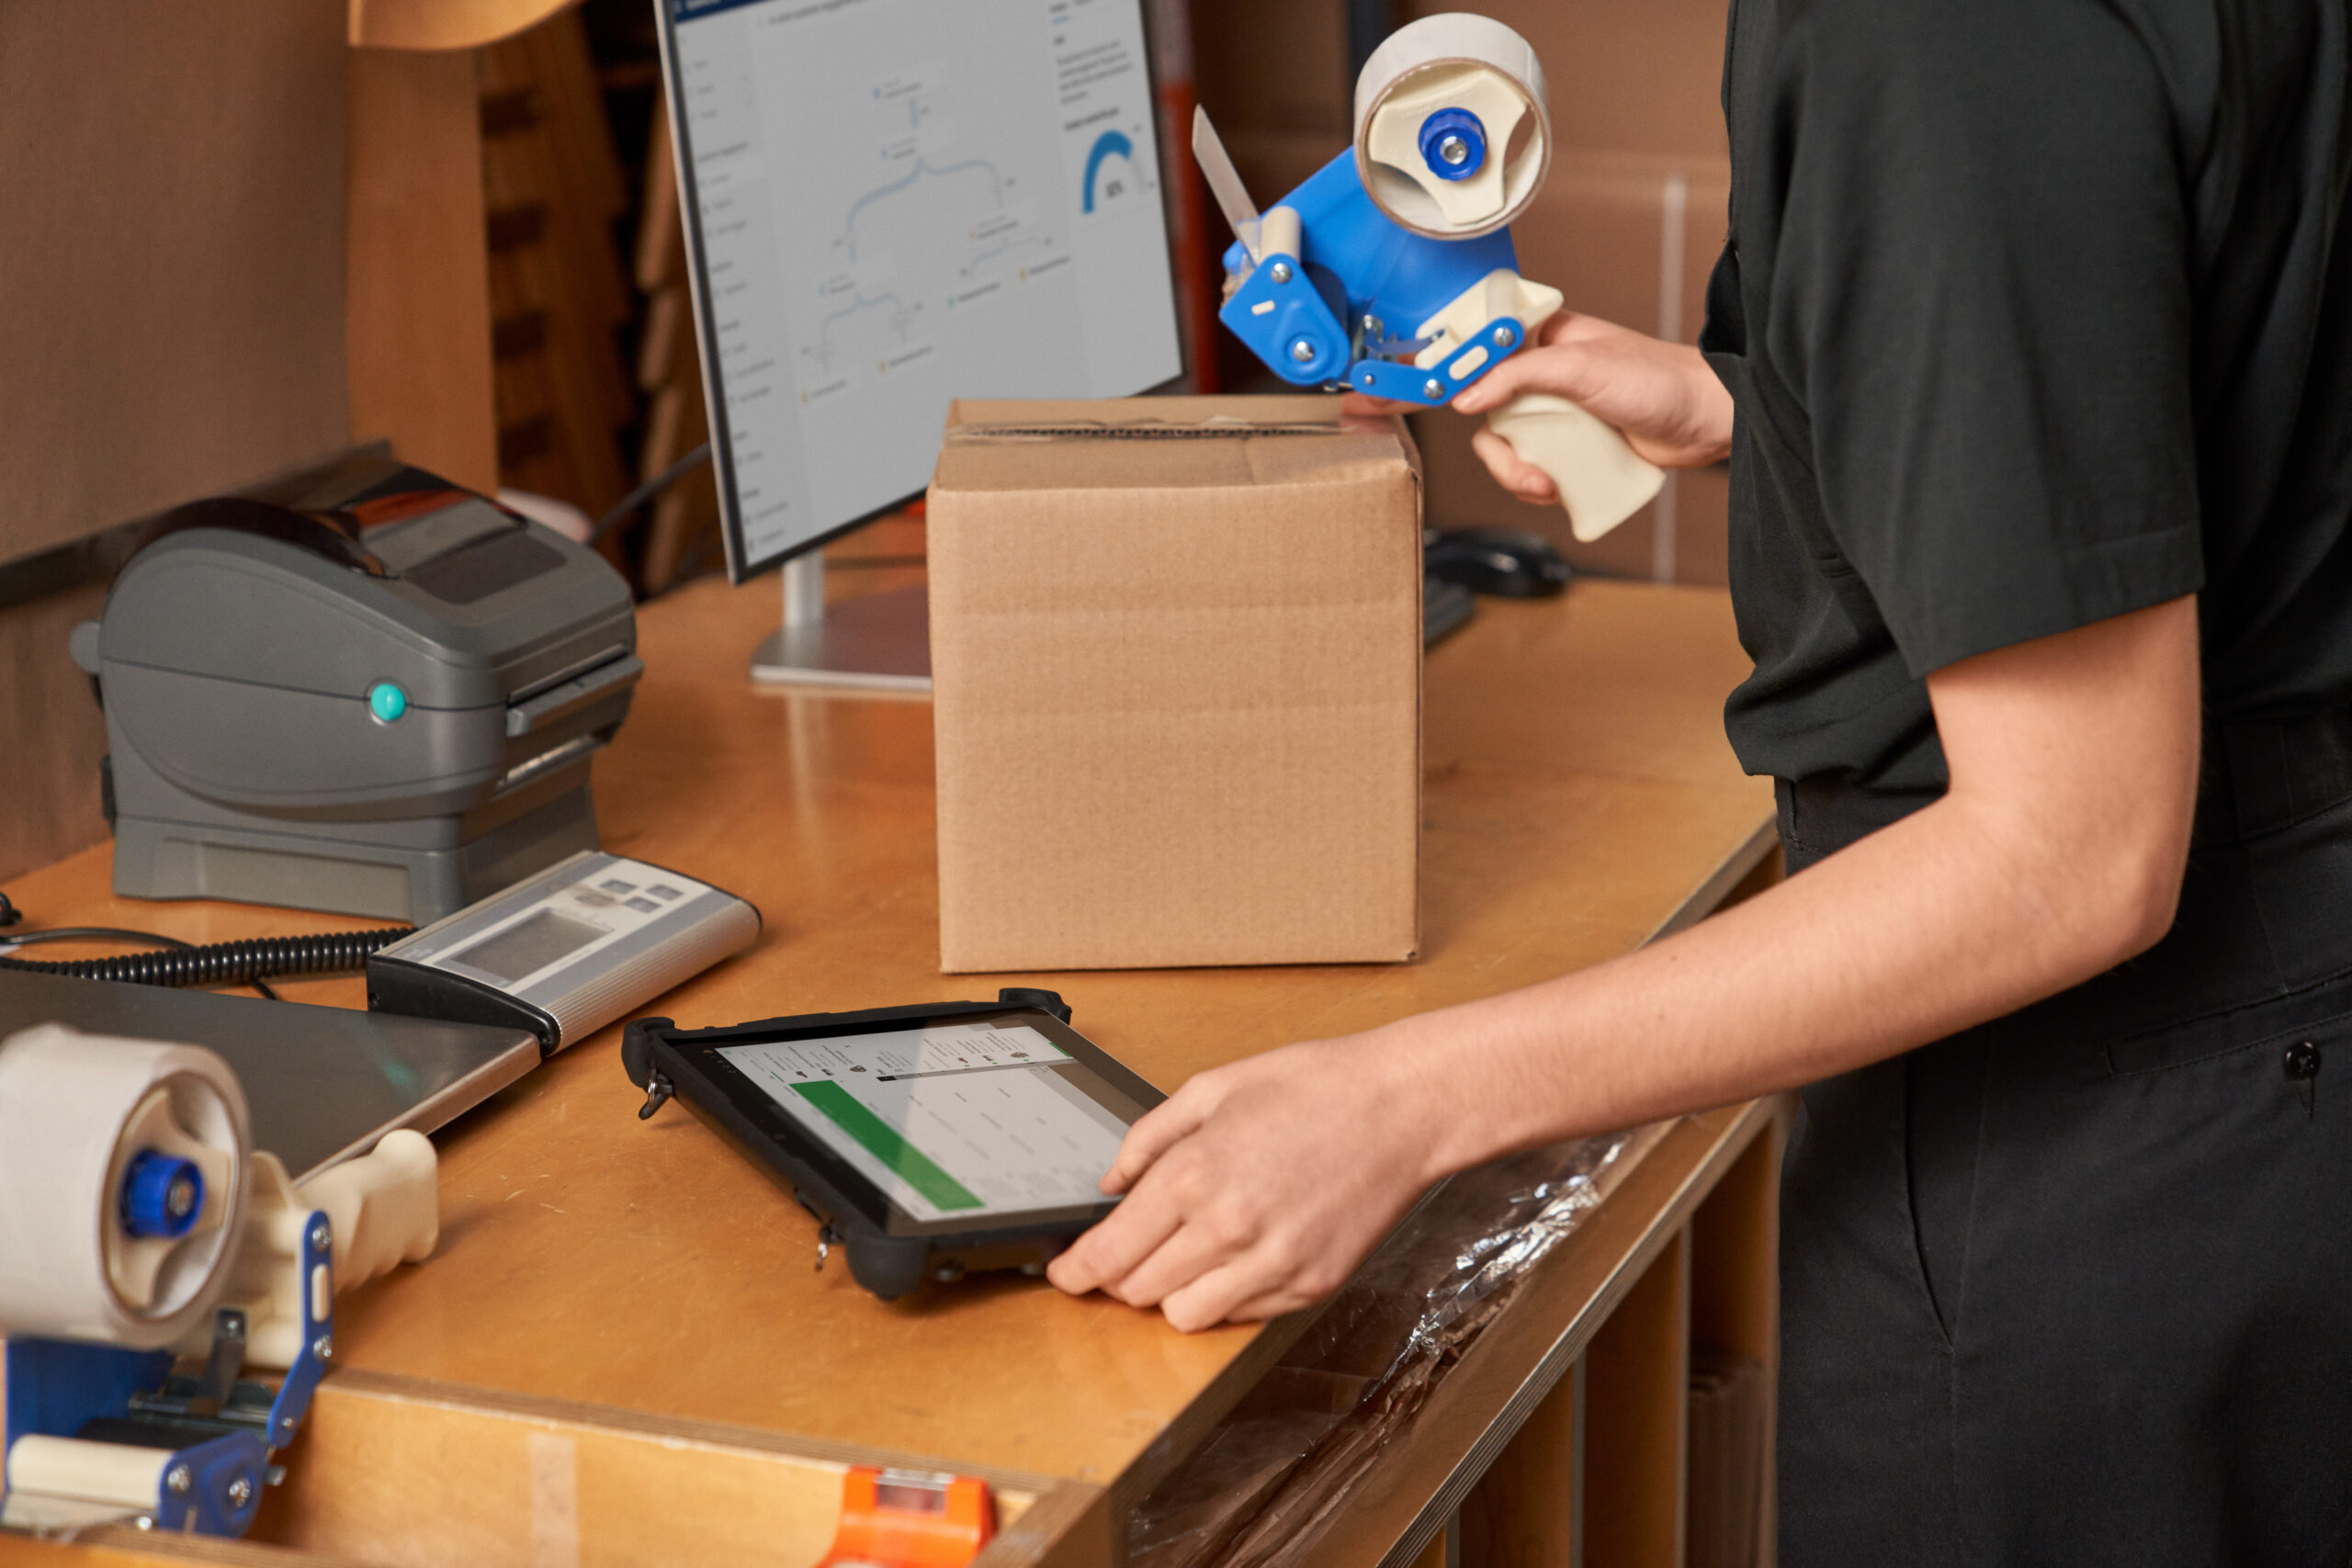 Customer service rep fulfilling, packaging and shipping online orders in the storeroom with a finance and operations mobile app on a phone and a desktop display.